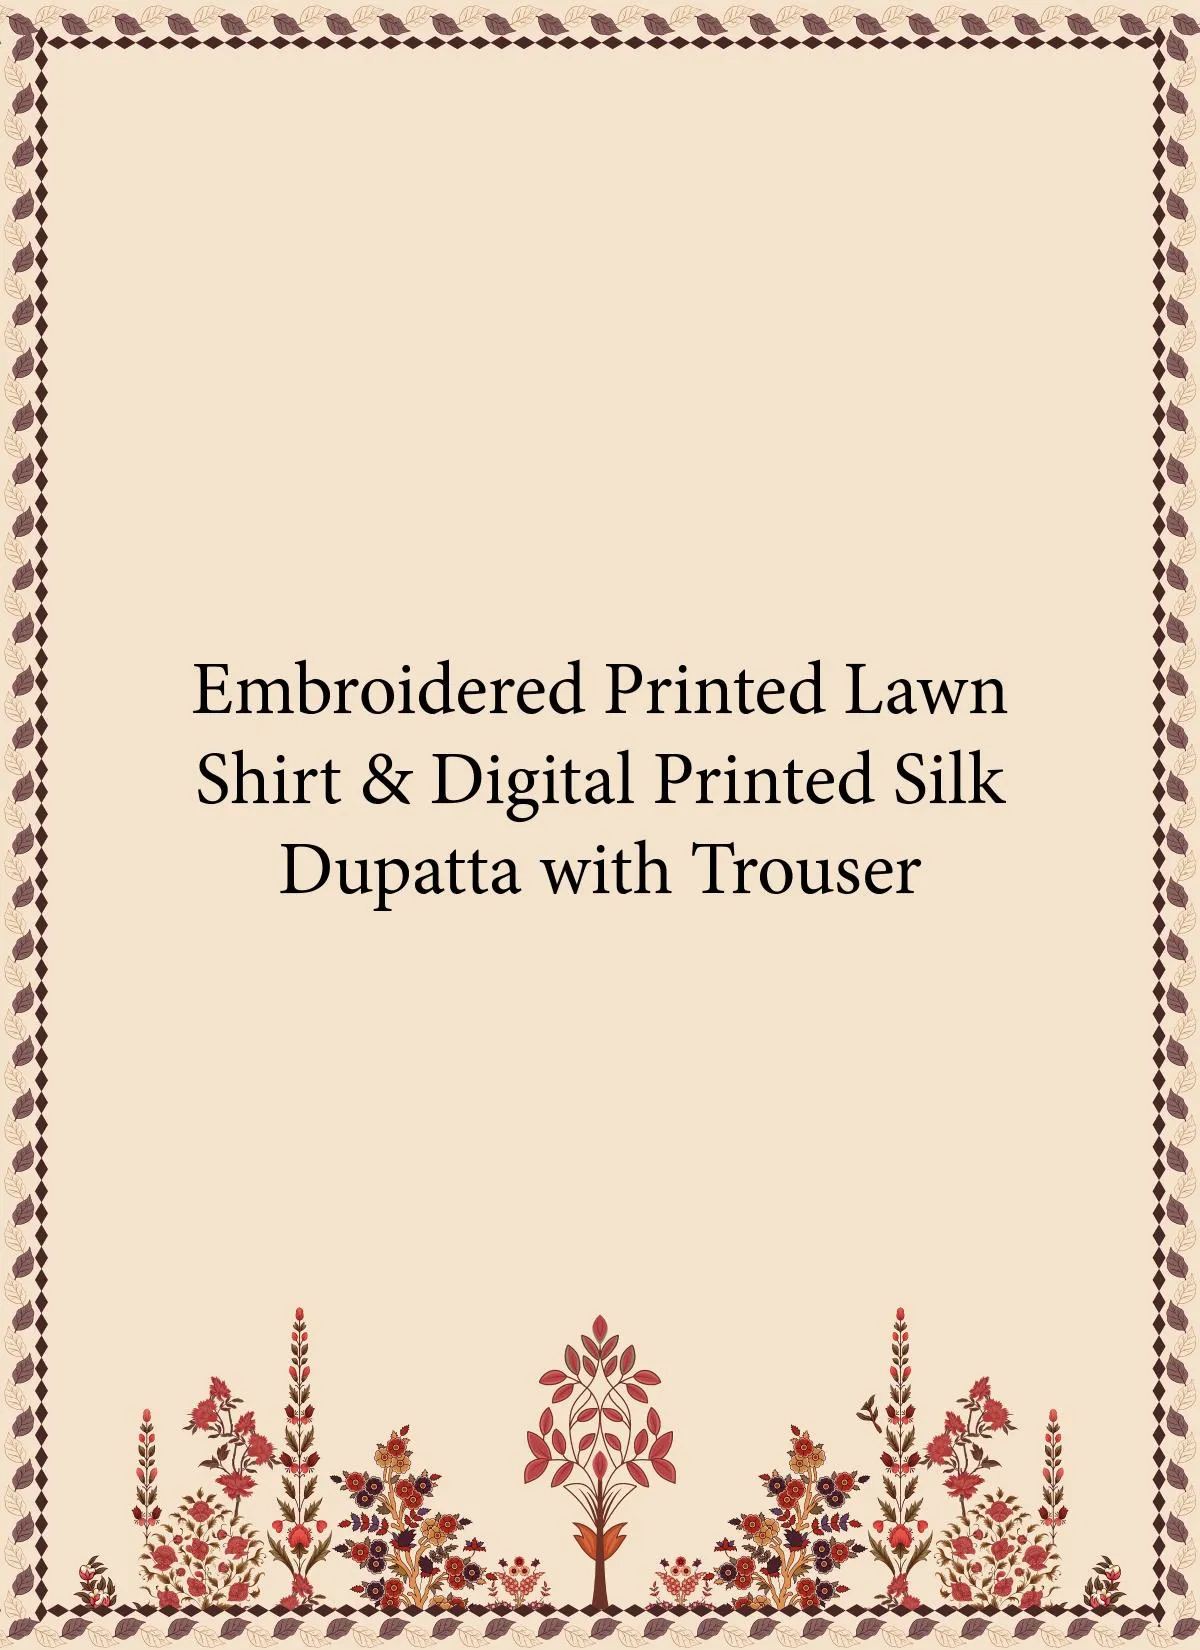 Embroidered shirt and digital printed silk dupatta with trouser